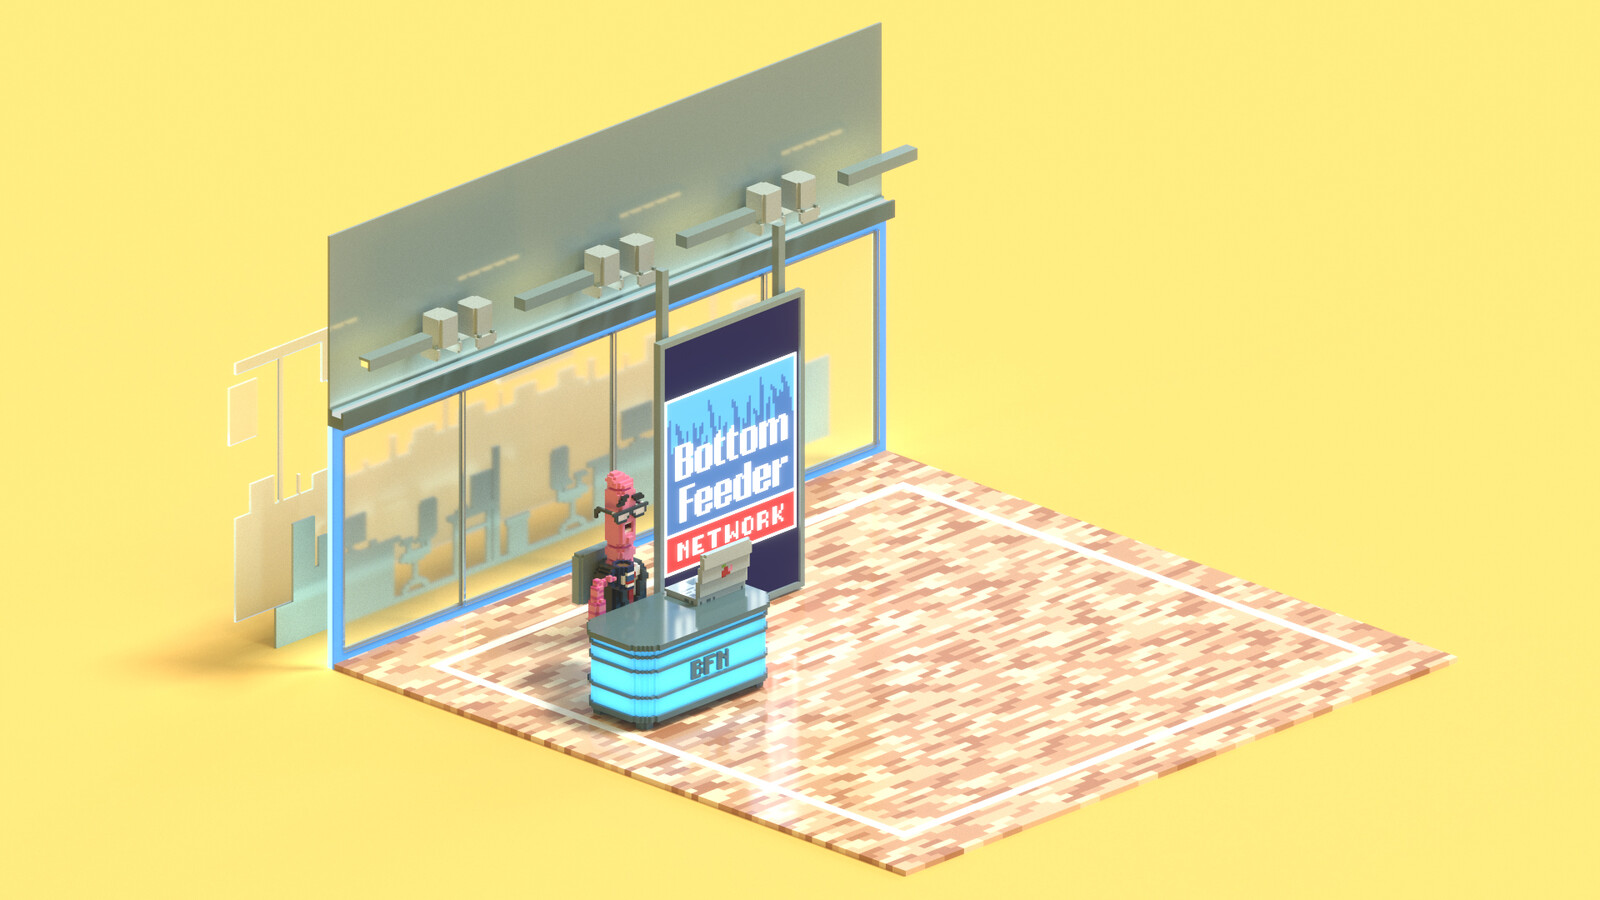 Render demonstrating the "forced perspective" elements that make up the voxel newsroom.